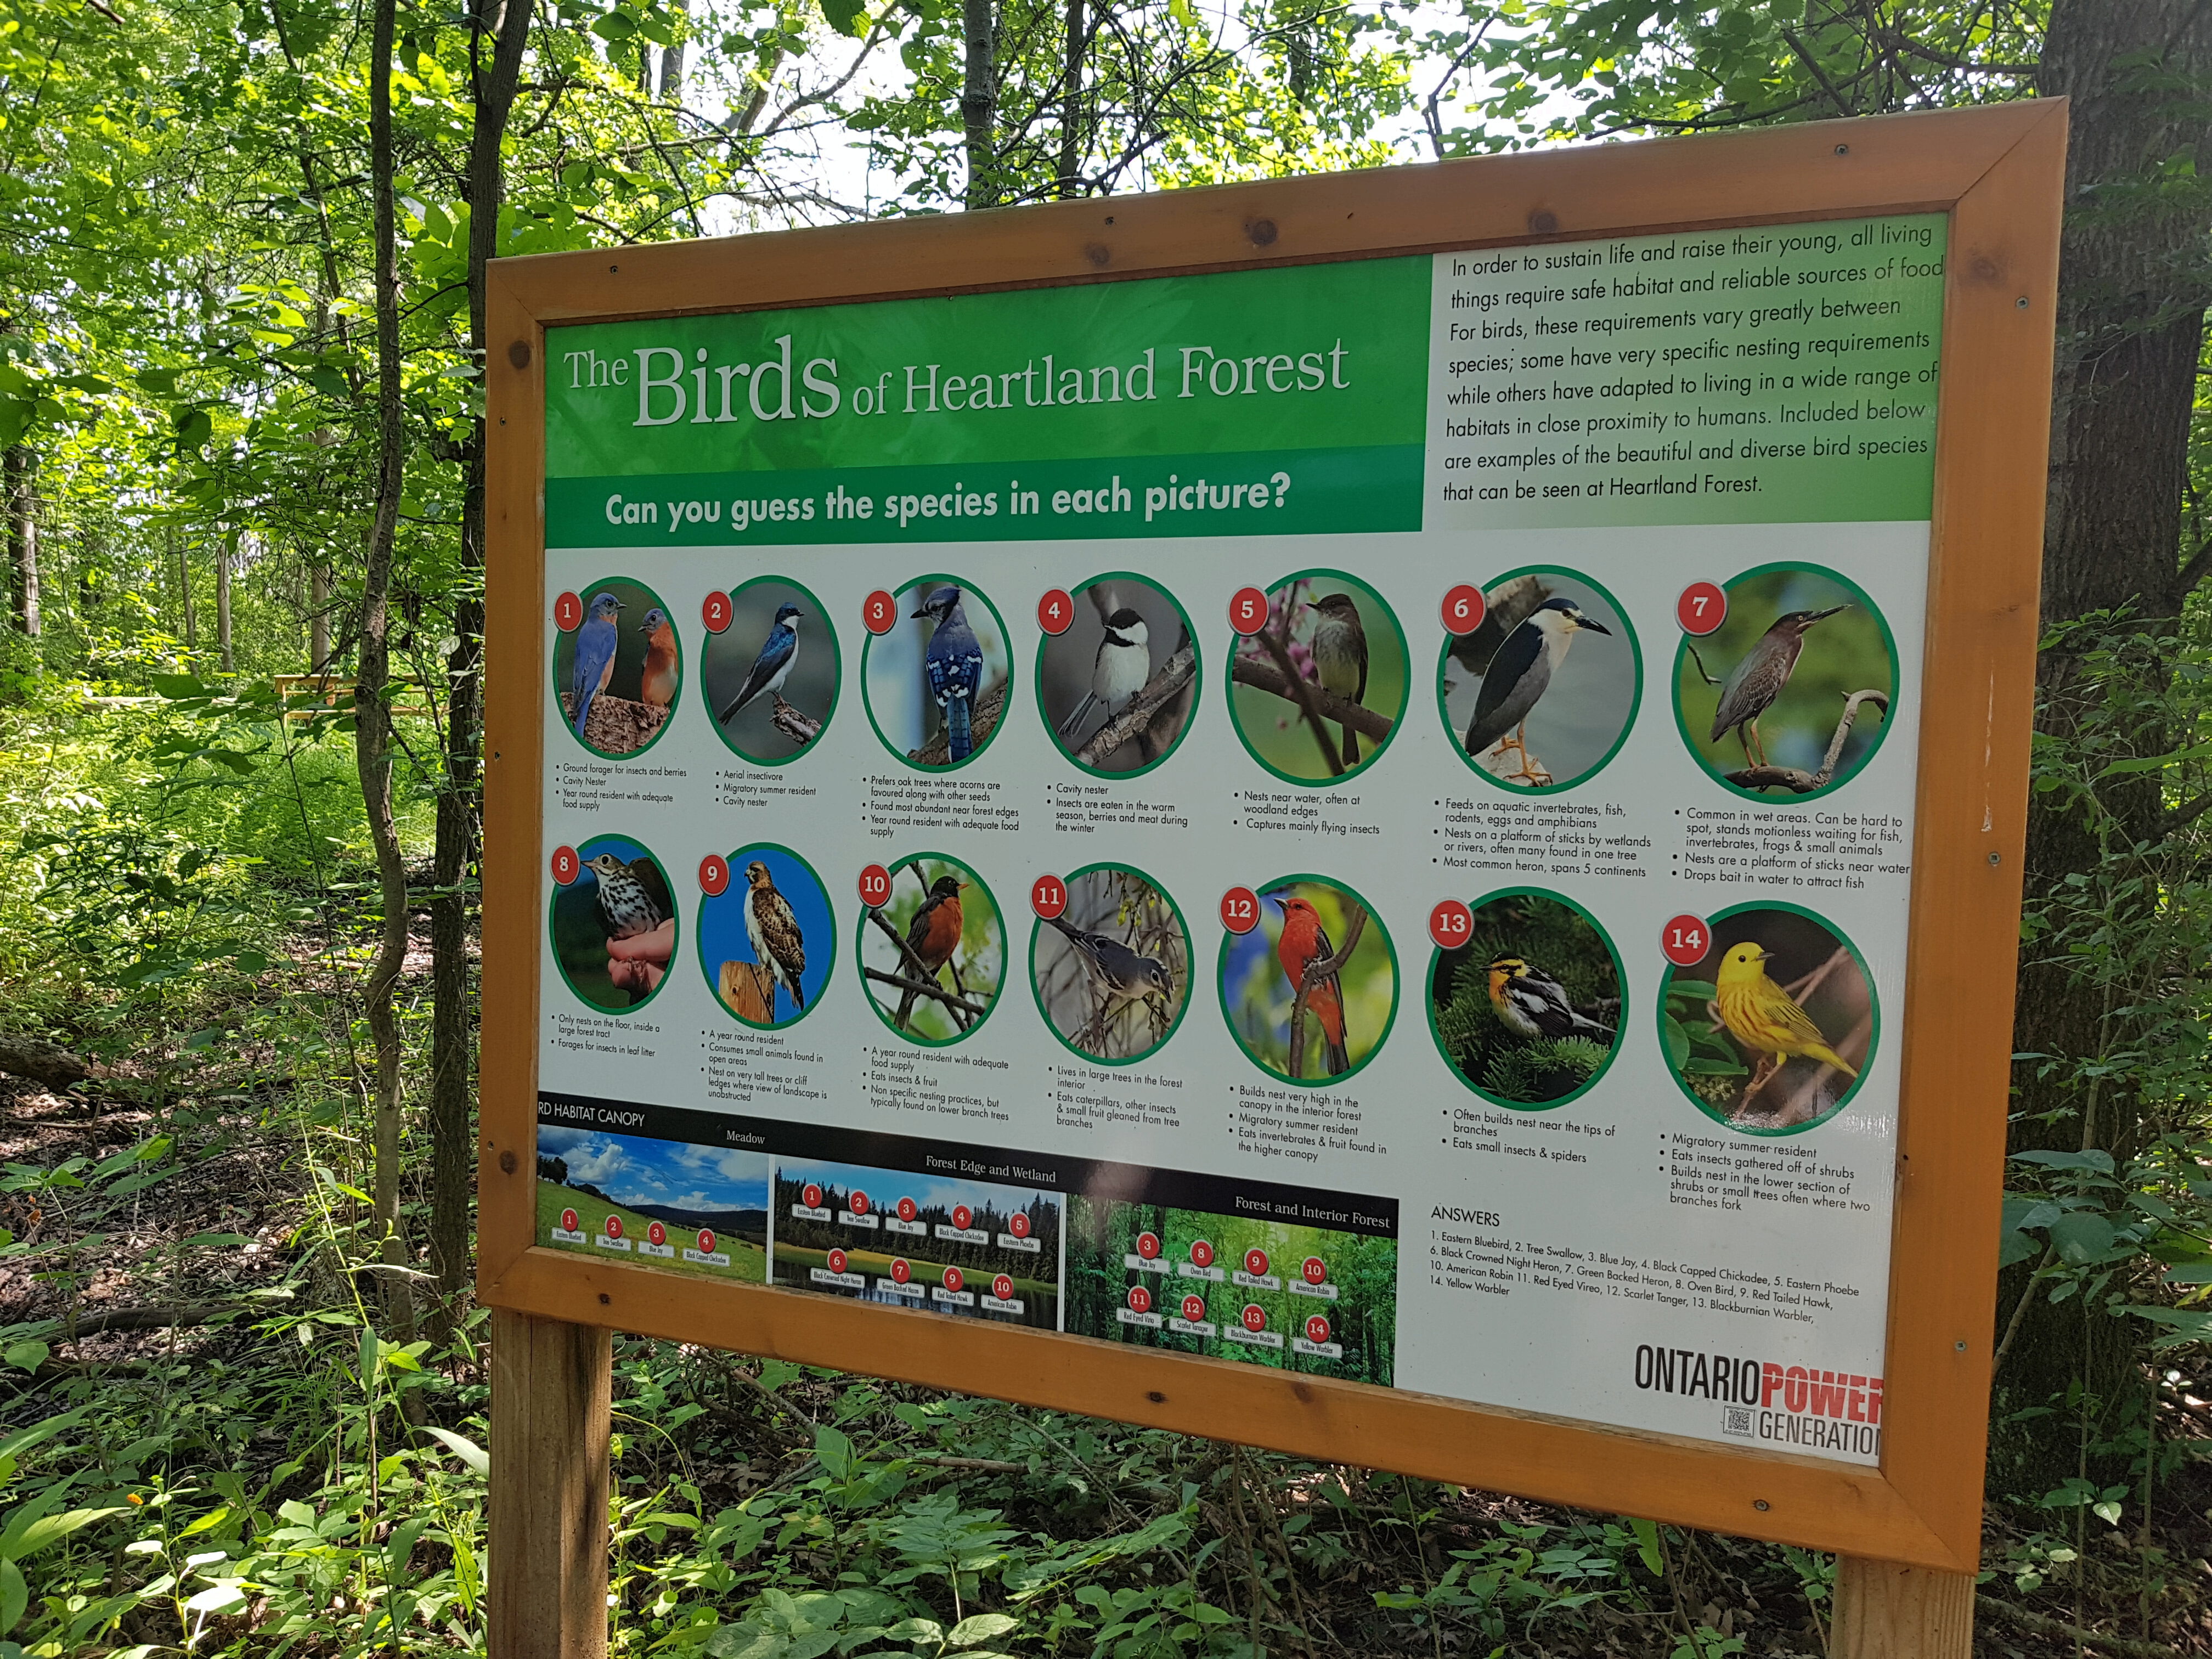 The birds of Heartland Forest information board.